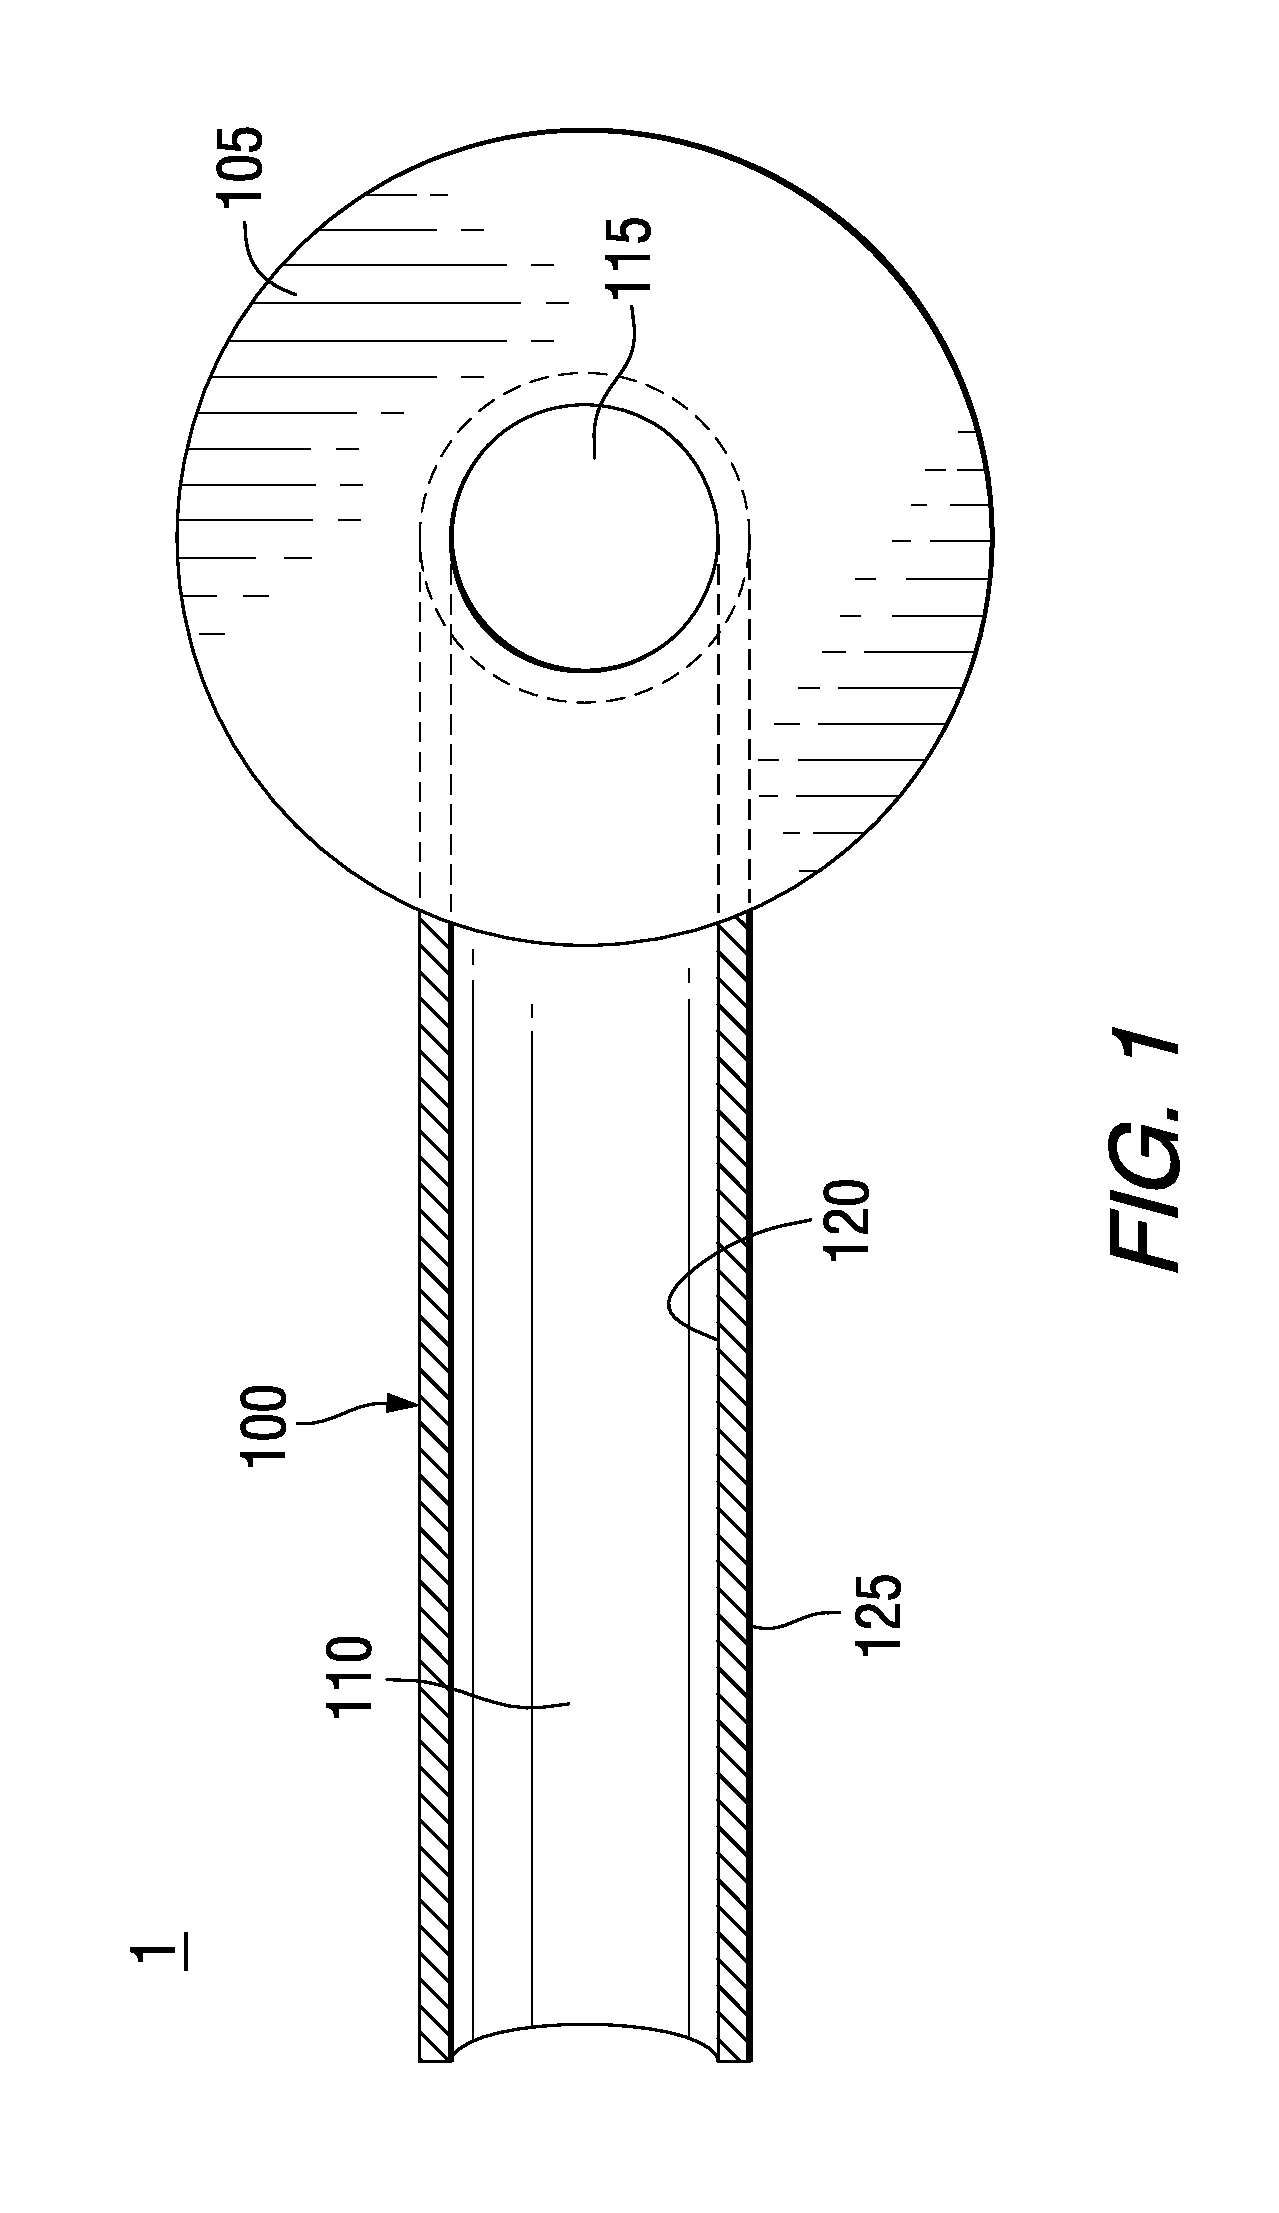 Phased array ultrasonic inspection system for turbine and generator rotor bore